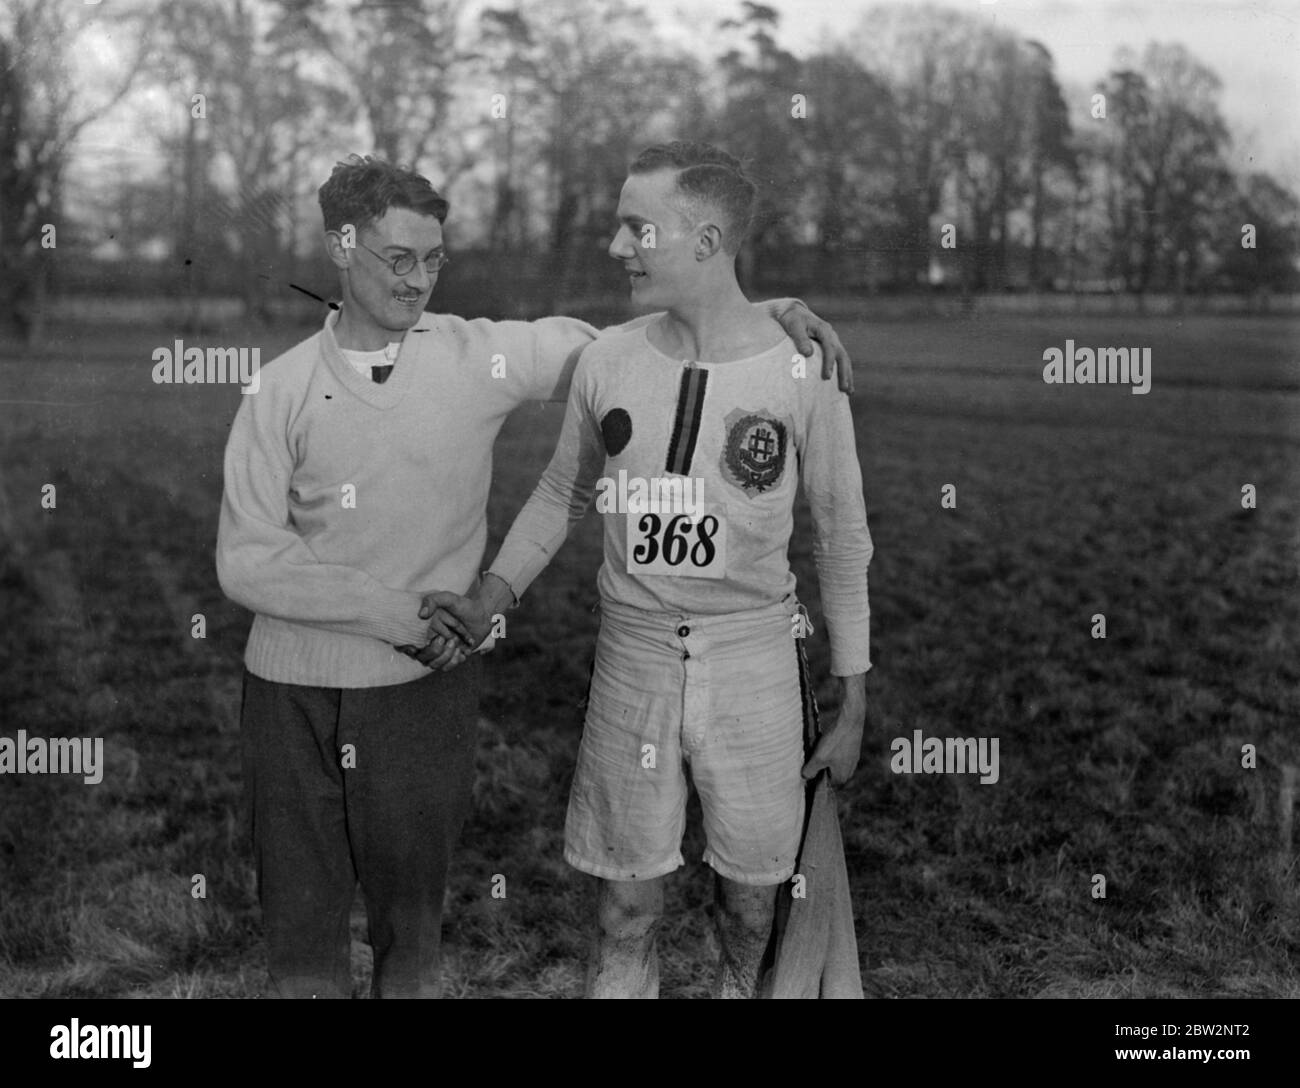 Winner of Southern Counties cross country championship . Fifty seven teams comprising an entry of over five hundred runners , competed in the Southern Counties Cross Country championship at Beaconsfield, Bucks . L H Weatherill ( left ) the winner being congratulated by his clubmate L F Humphries both of South London Harriers who was second . 27 February 1932 30s, 30's, 1930s, 1930's, thirties, nineteen thirties Stock Photo